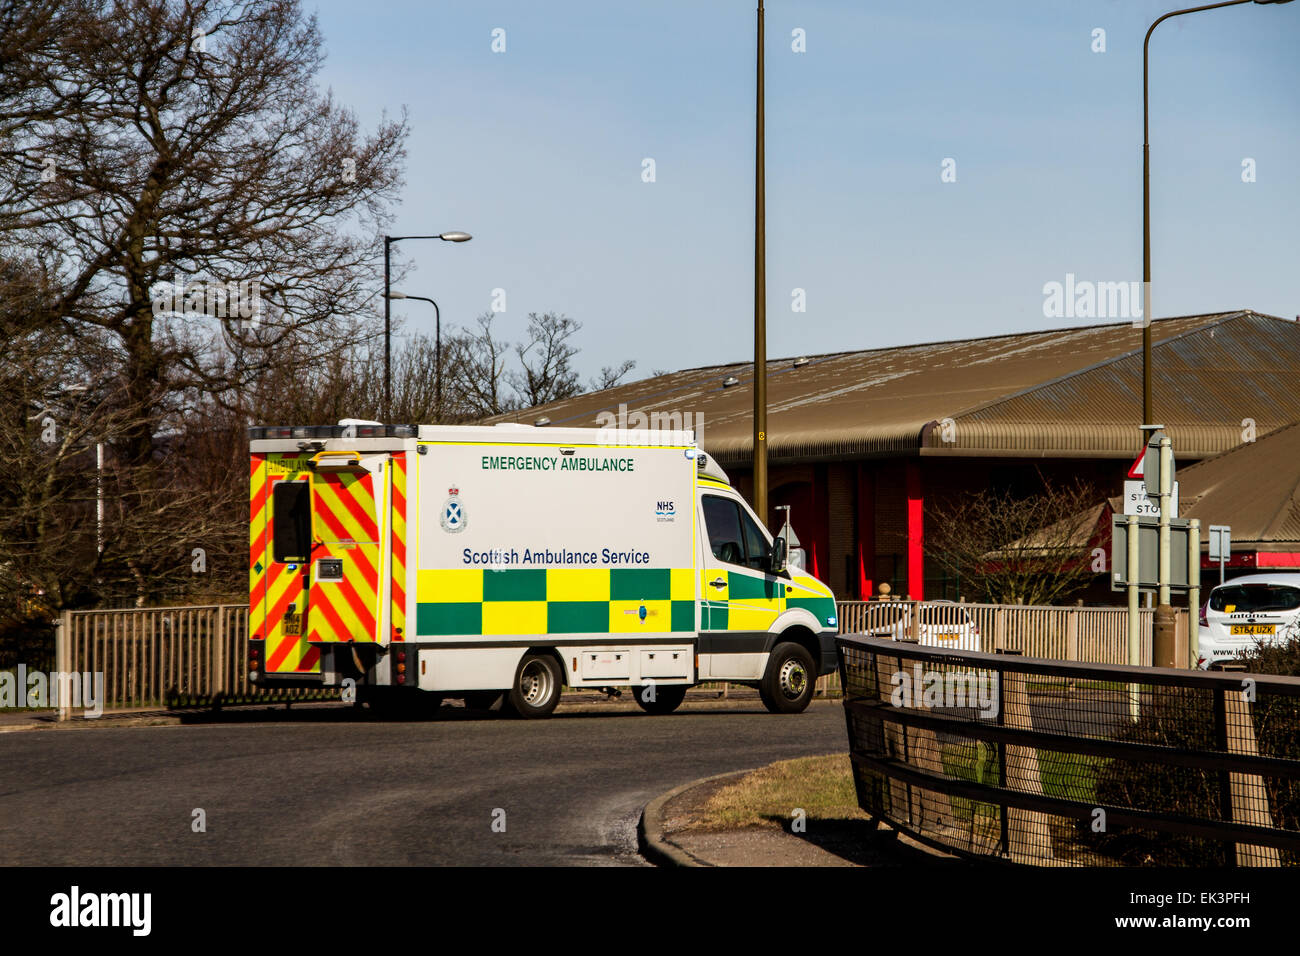 An Emergency Ambulance from the Scottish Ambulance Service responding to a 999 emergency call in Dundee, Scotland Stock Photo